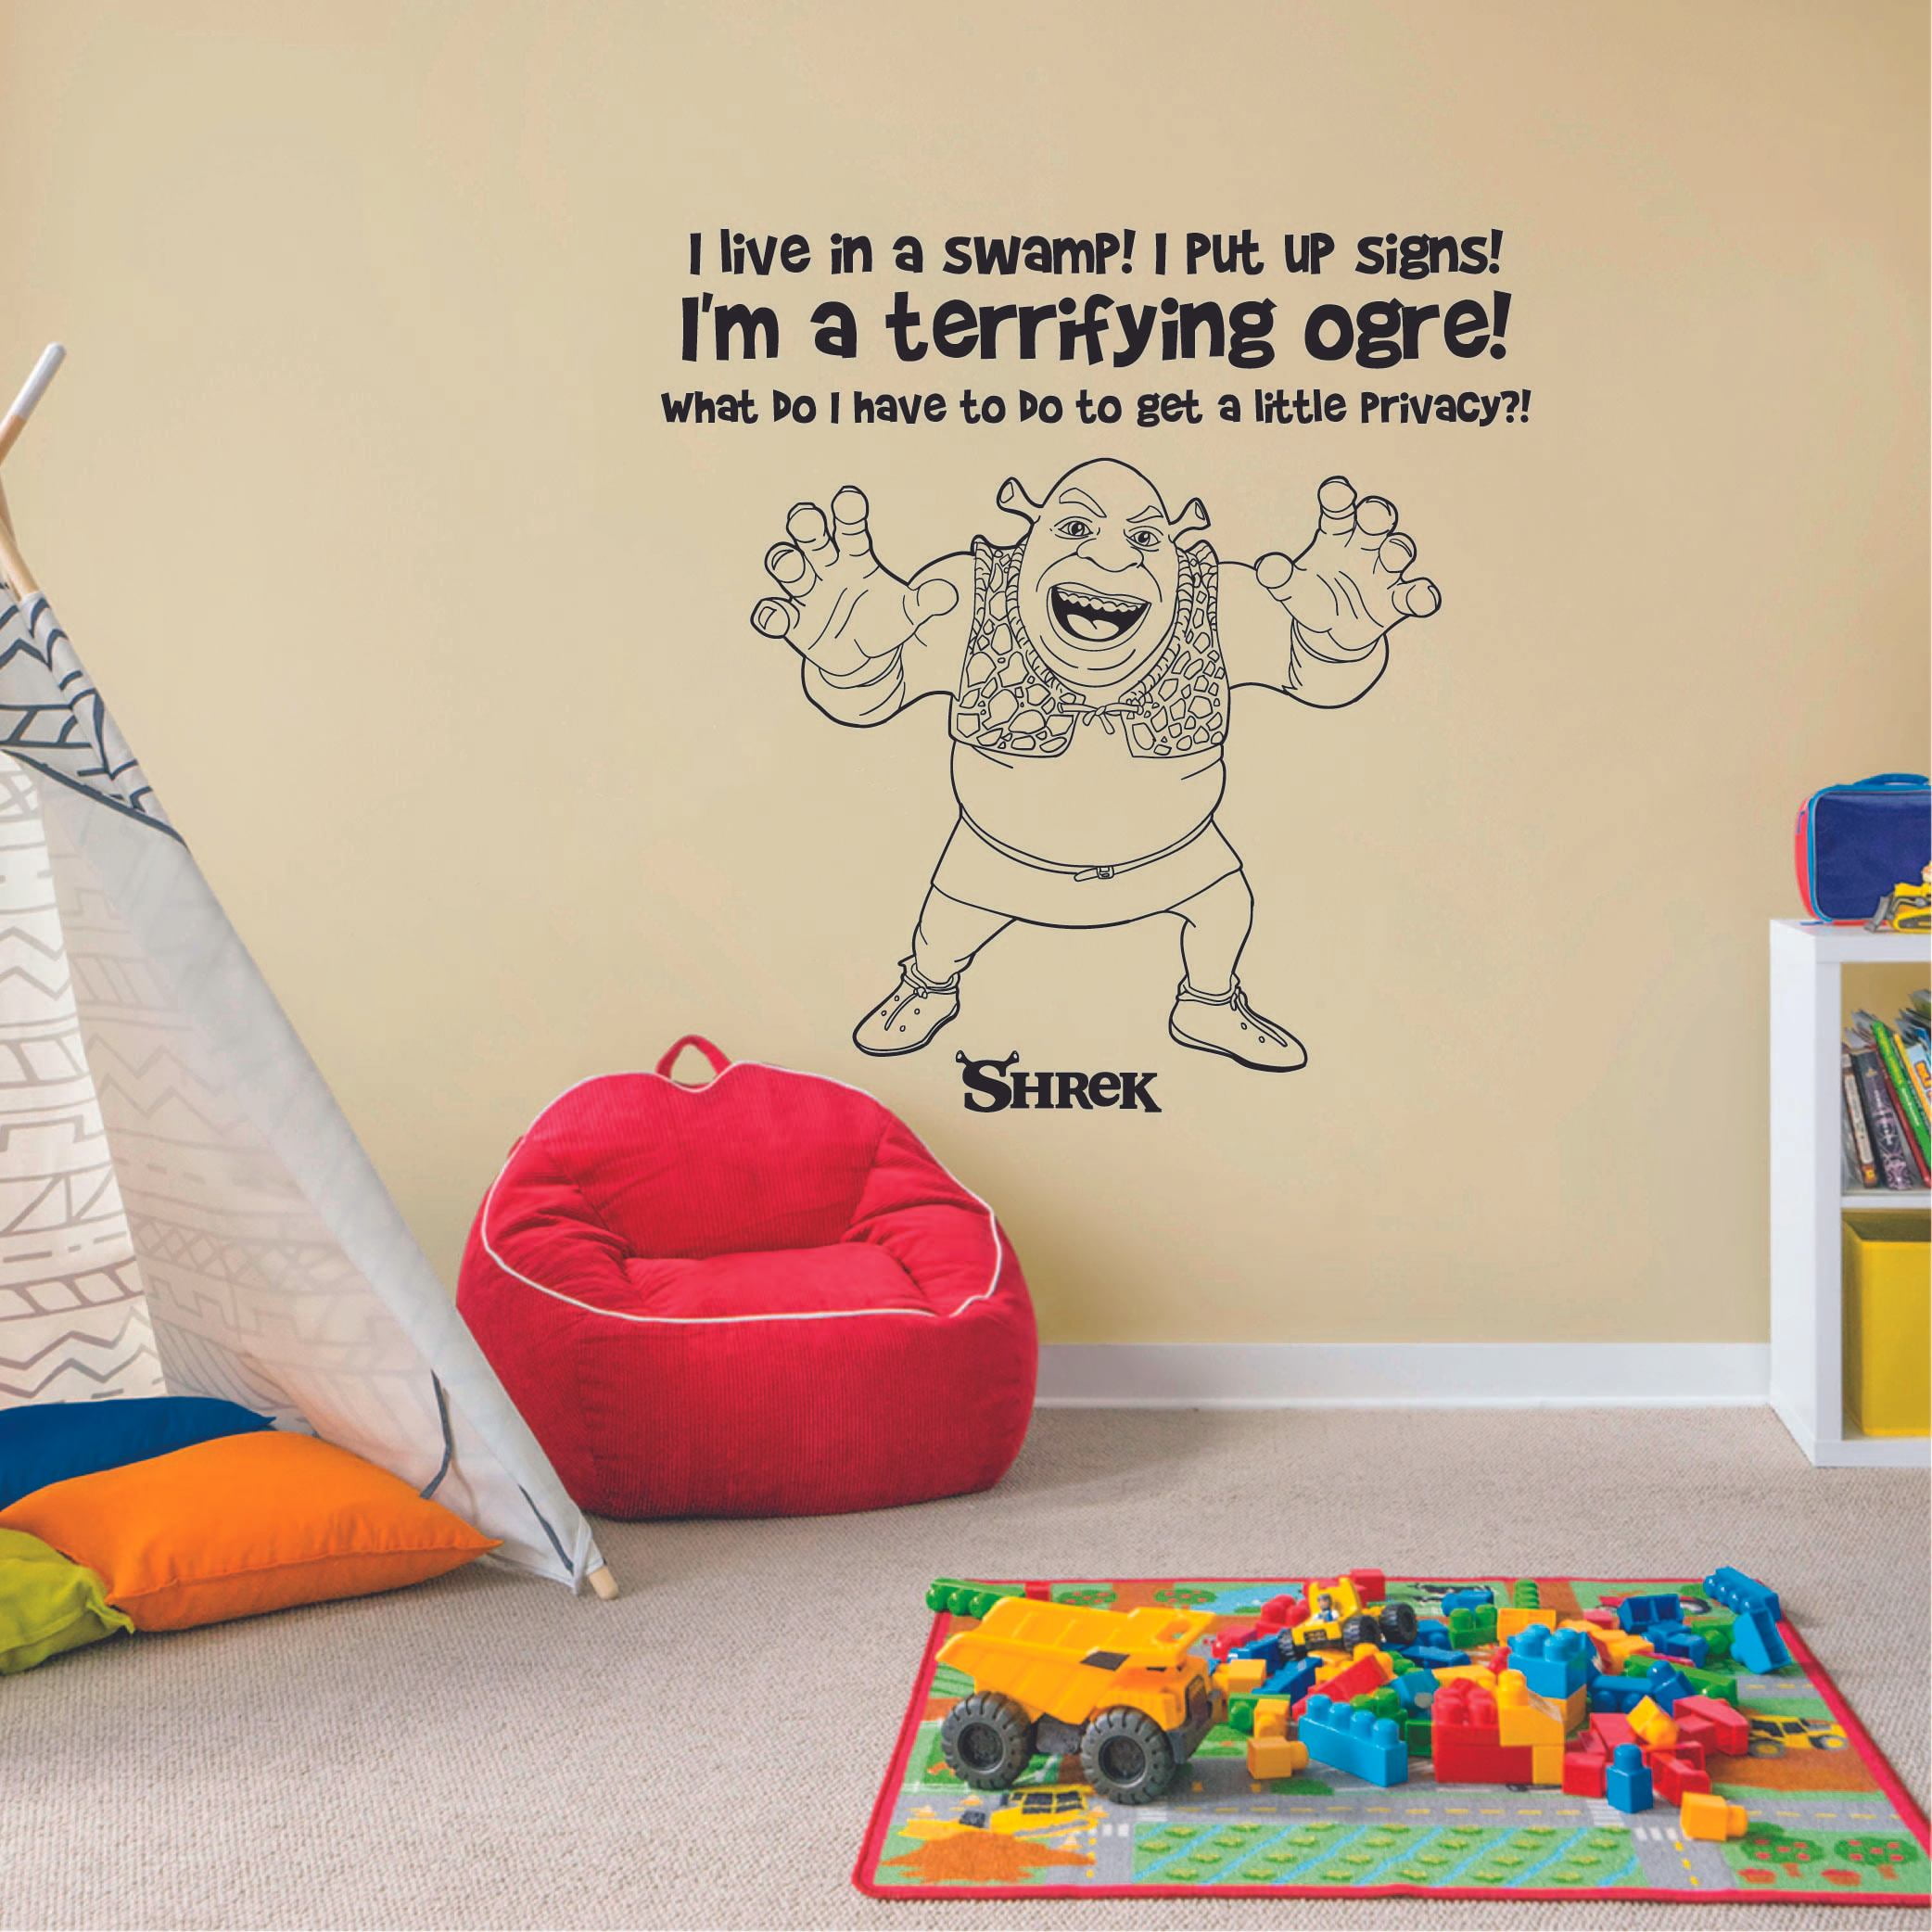 Im A Terrifying Ogre I Live In Swamp - Disney Movie Shrek Quotes Quote  Vinyl Wall Art Wall Decal Wall Sticker Decoration Home Room Kids Childrens  Room Boys Girls Nursery Kindergarten Size (